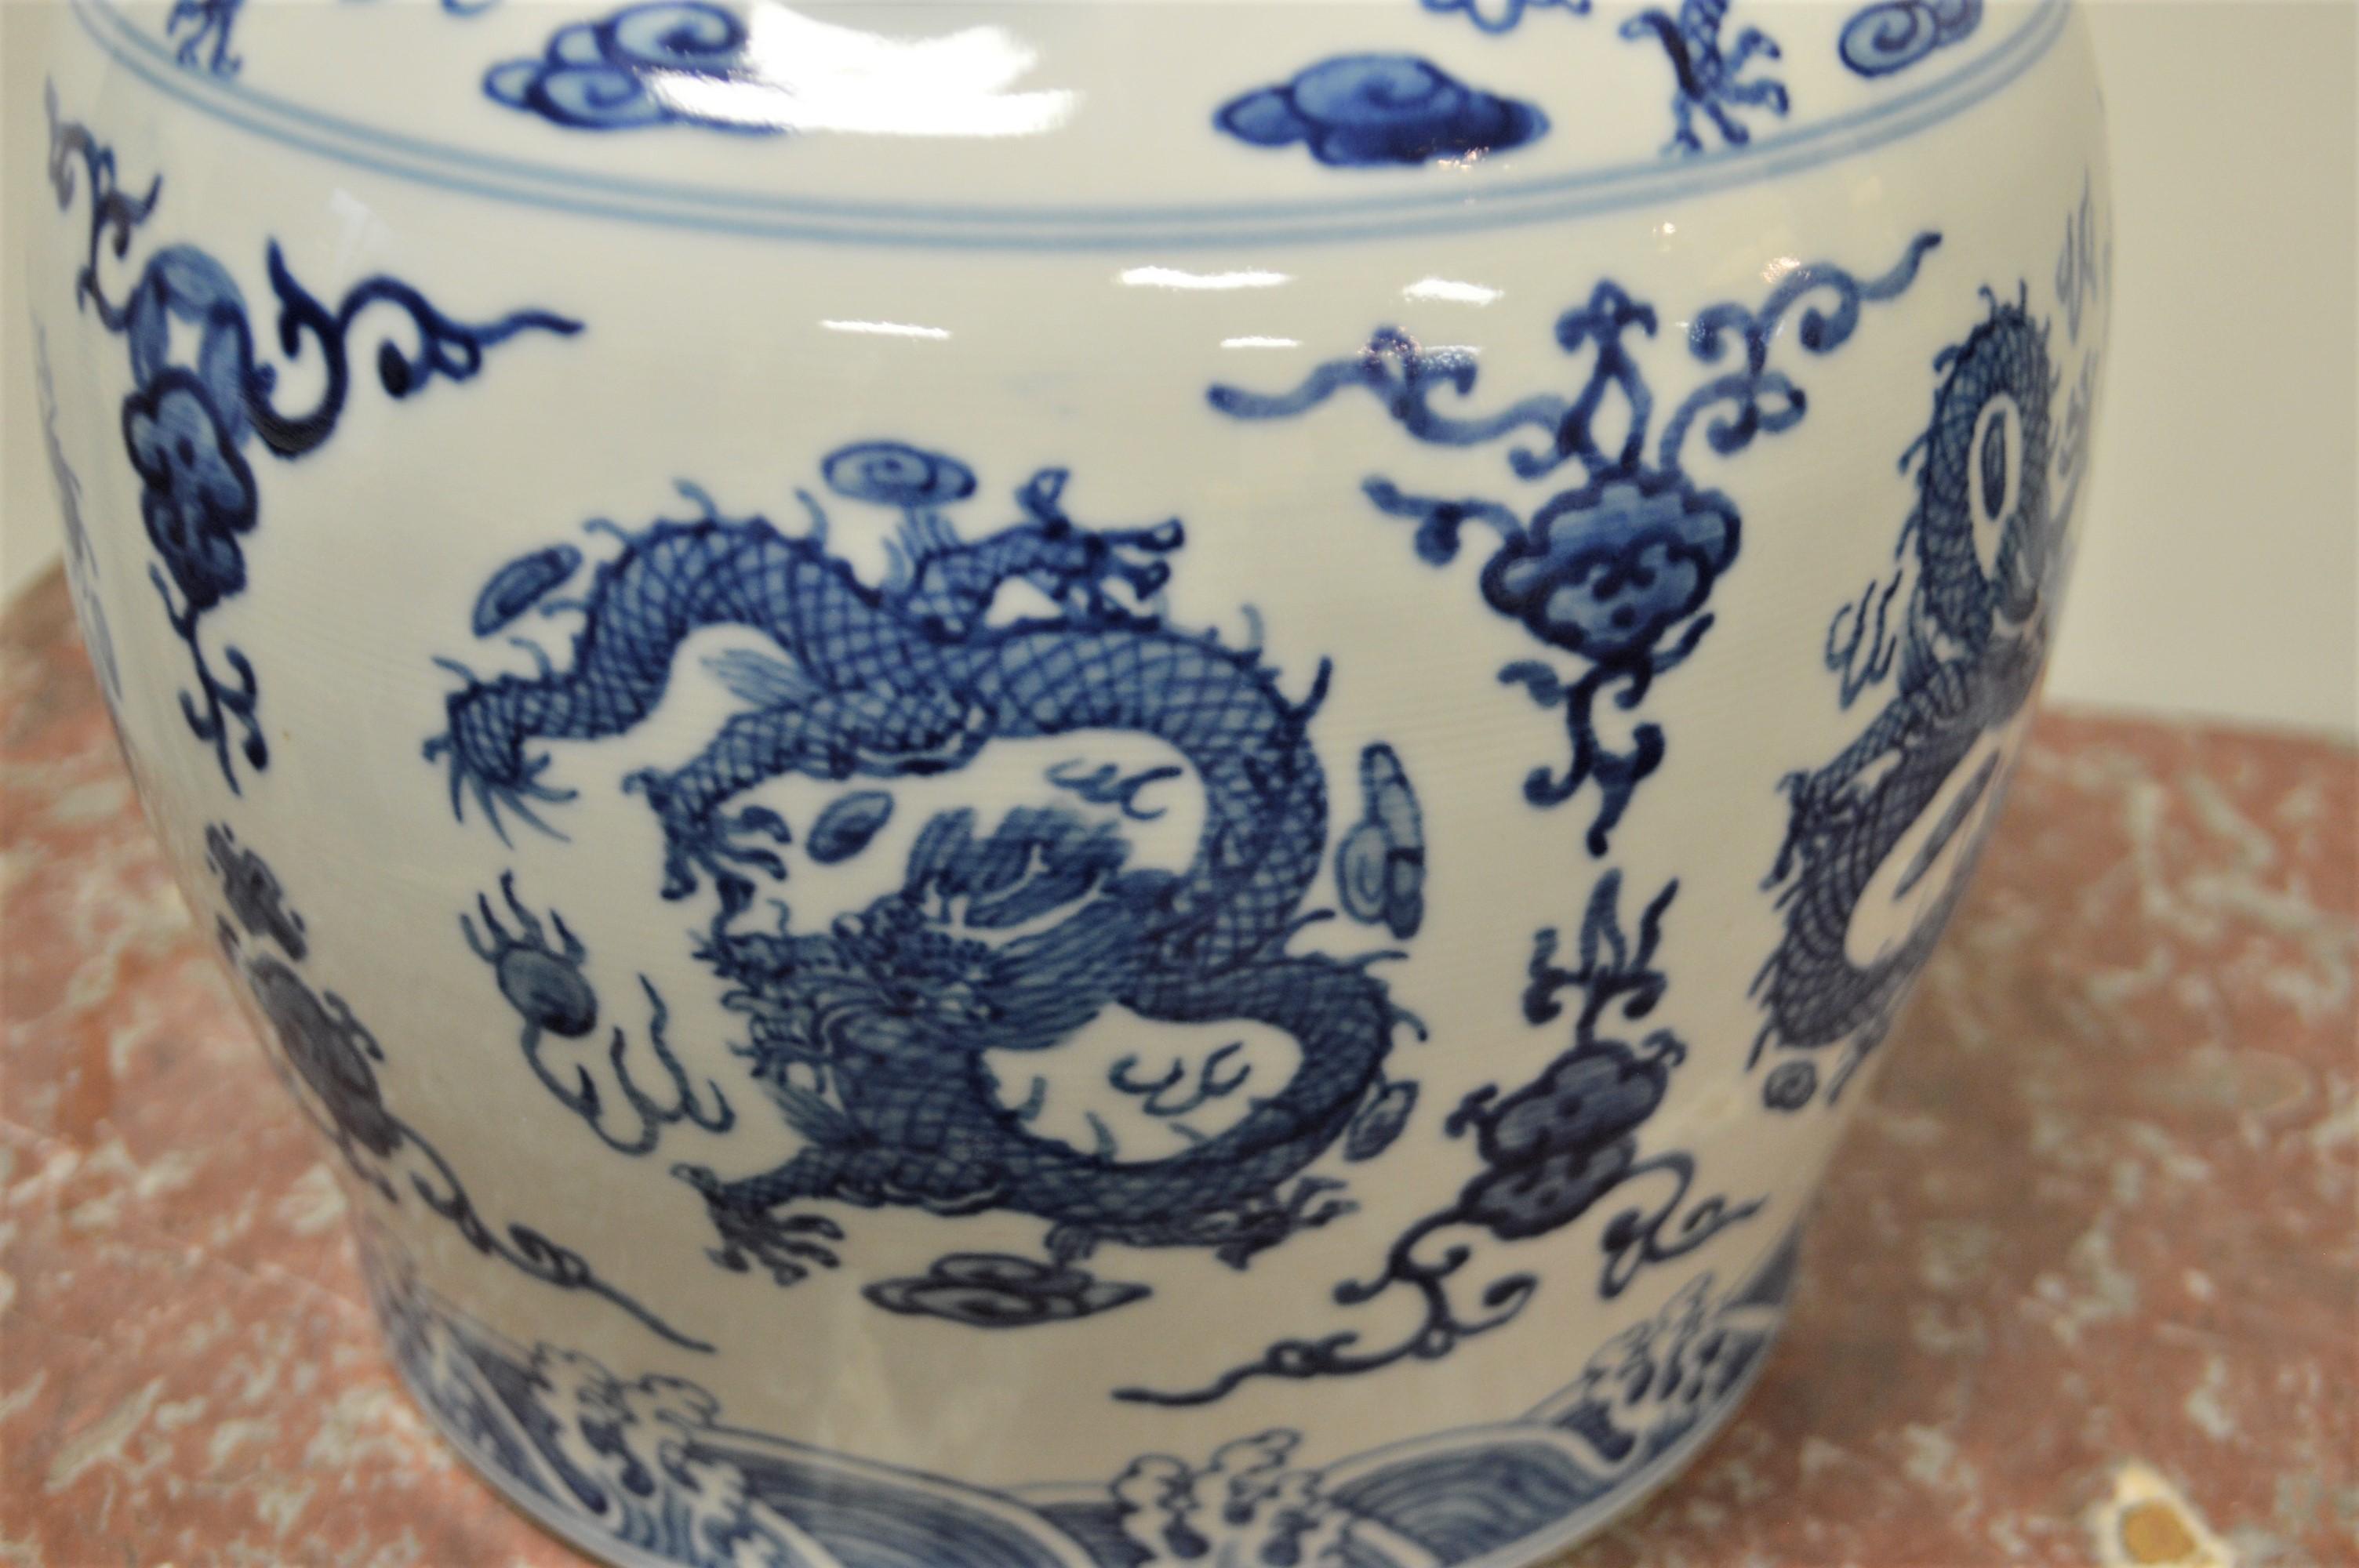 Chinese Export Large Blue and White Decorative Chinese Porcelain Tea Pot with Dragon Design